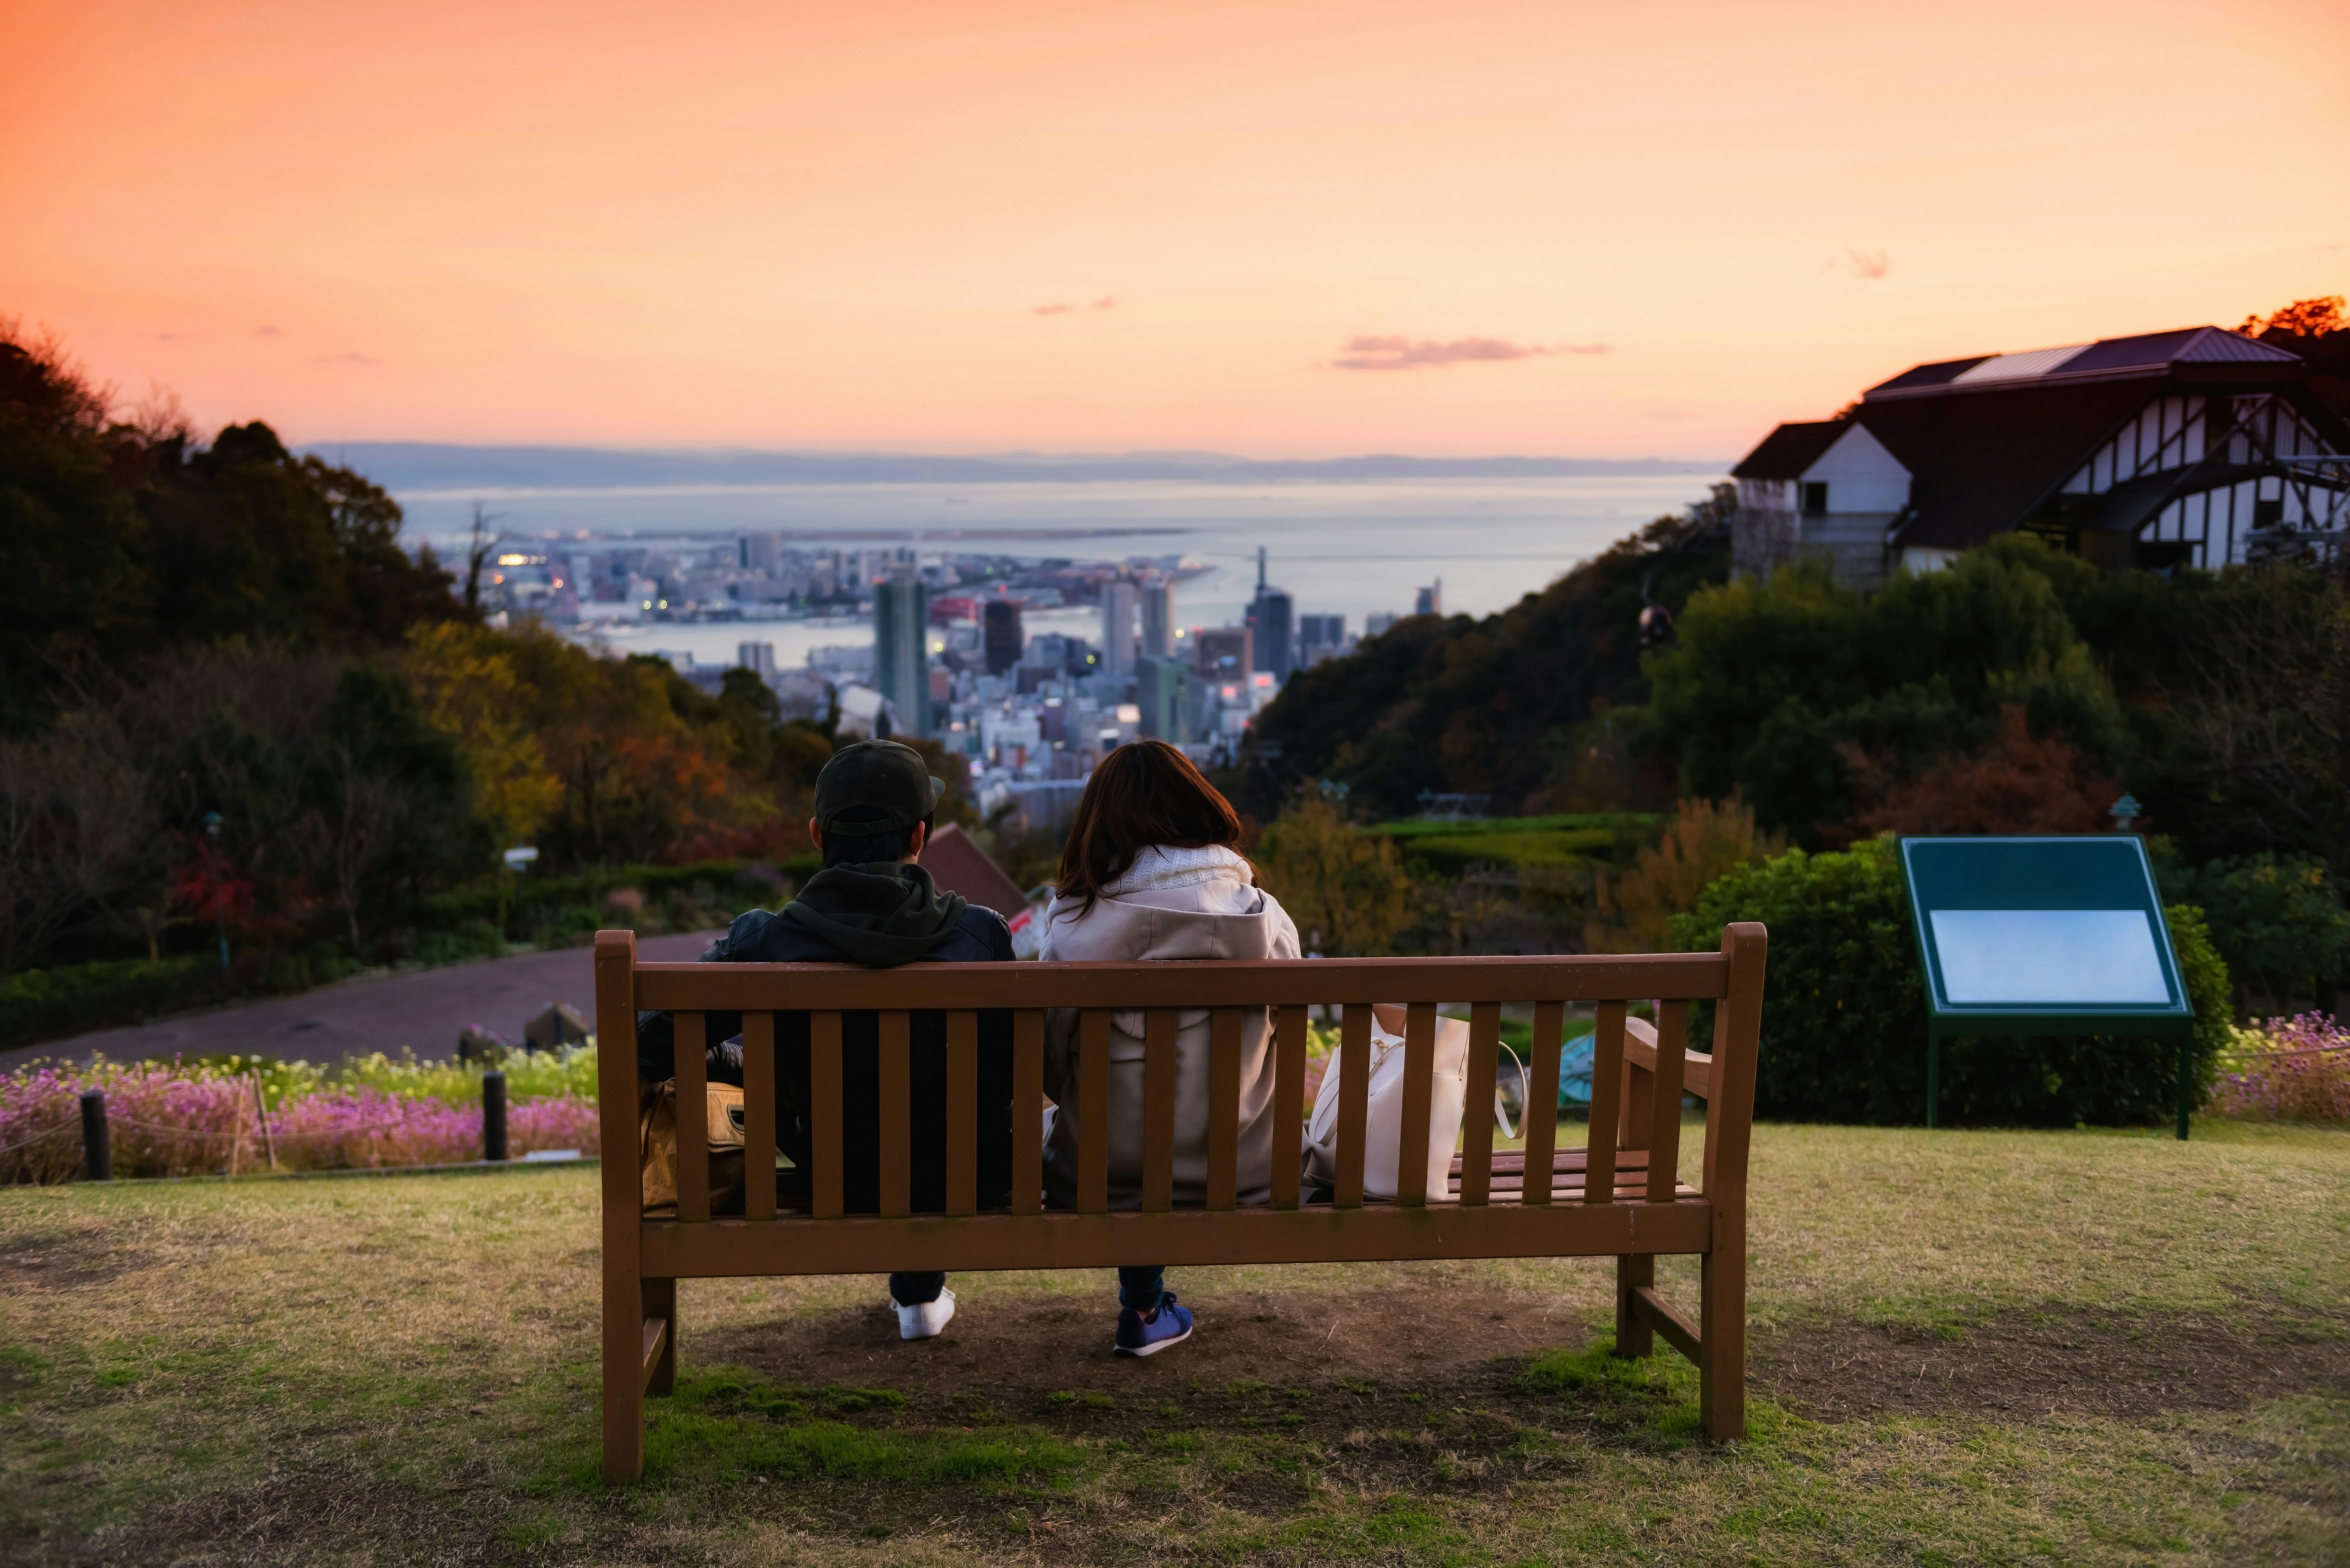 Sweet young couple sitting on wooden chair seat to enjoy aerial view of Kobe Nunobiki Herb Gardens and skyline cityscape with twilight sky at dusk, Japan.